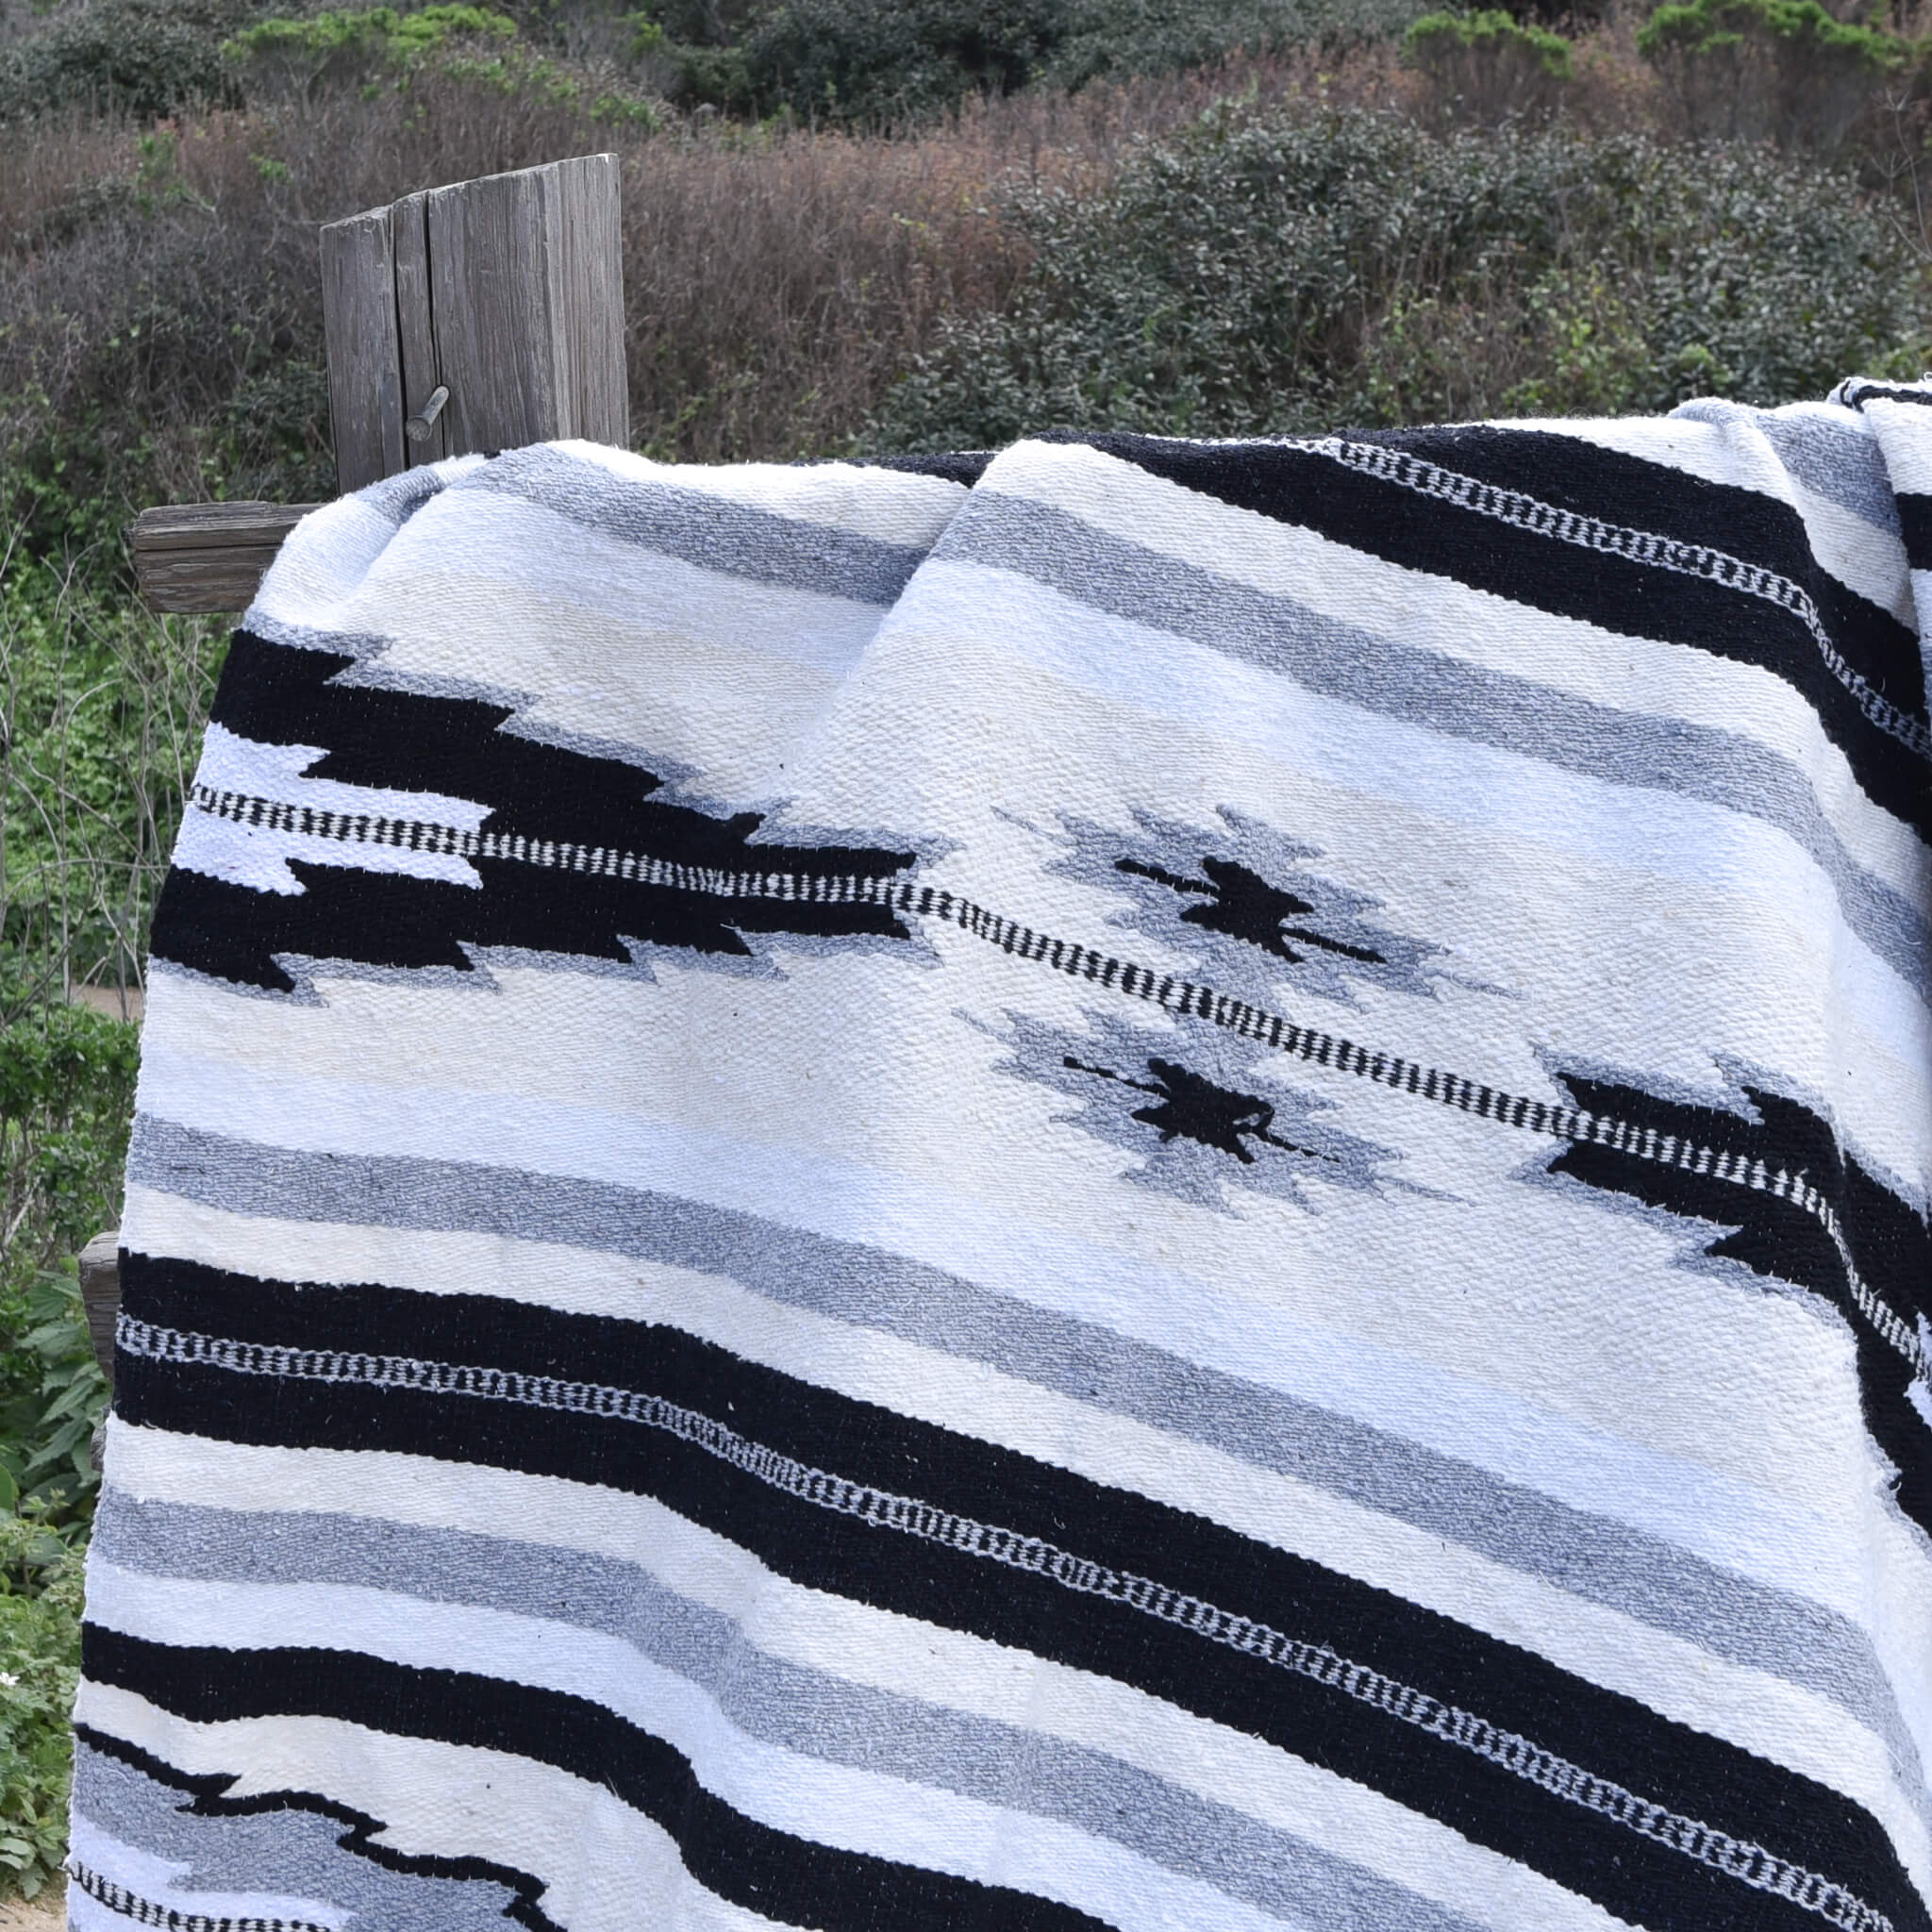 Details on a Zapotec Mexican serape blanket.